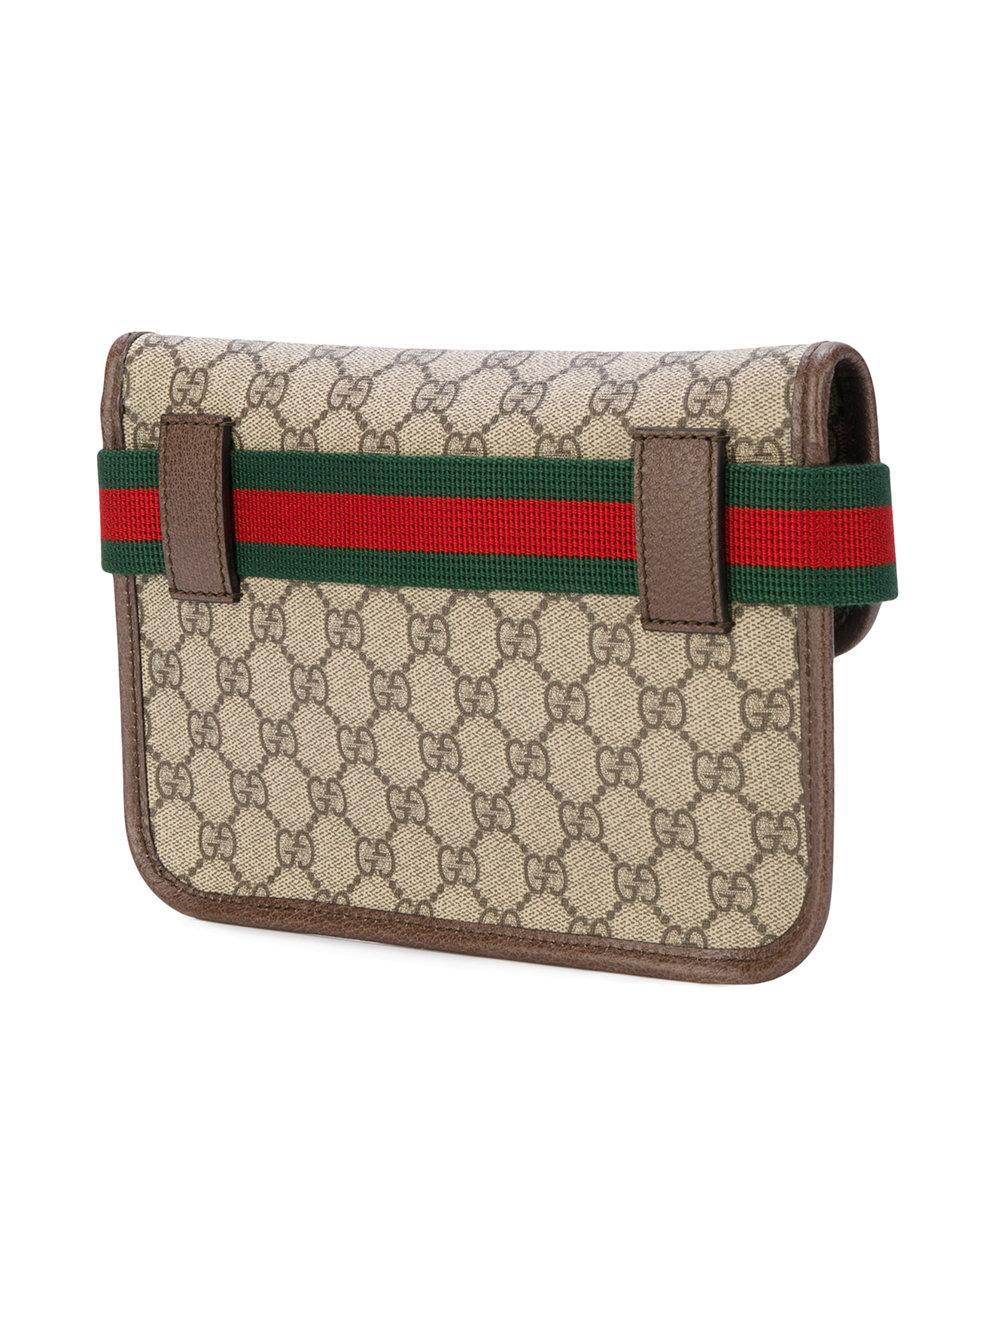 Gucci Leather Gg Supreme Belt Bag in Brown - Lyst